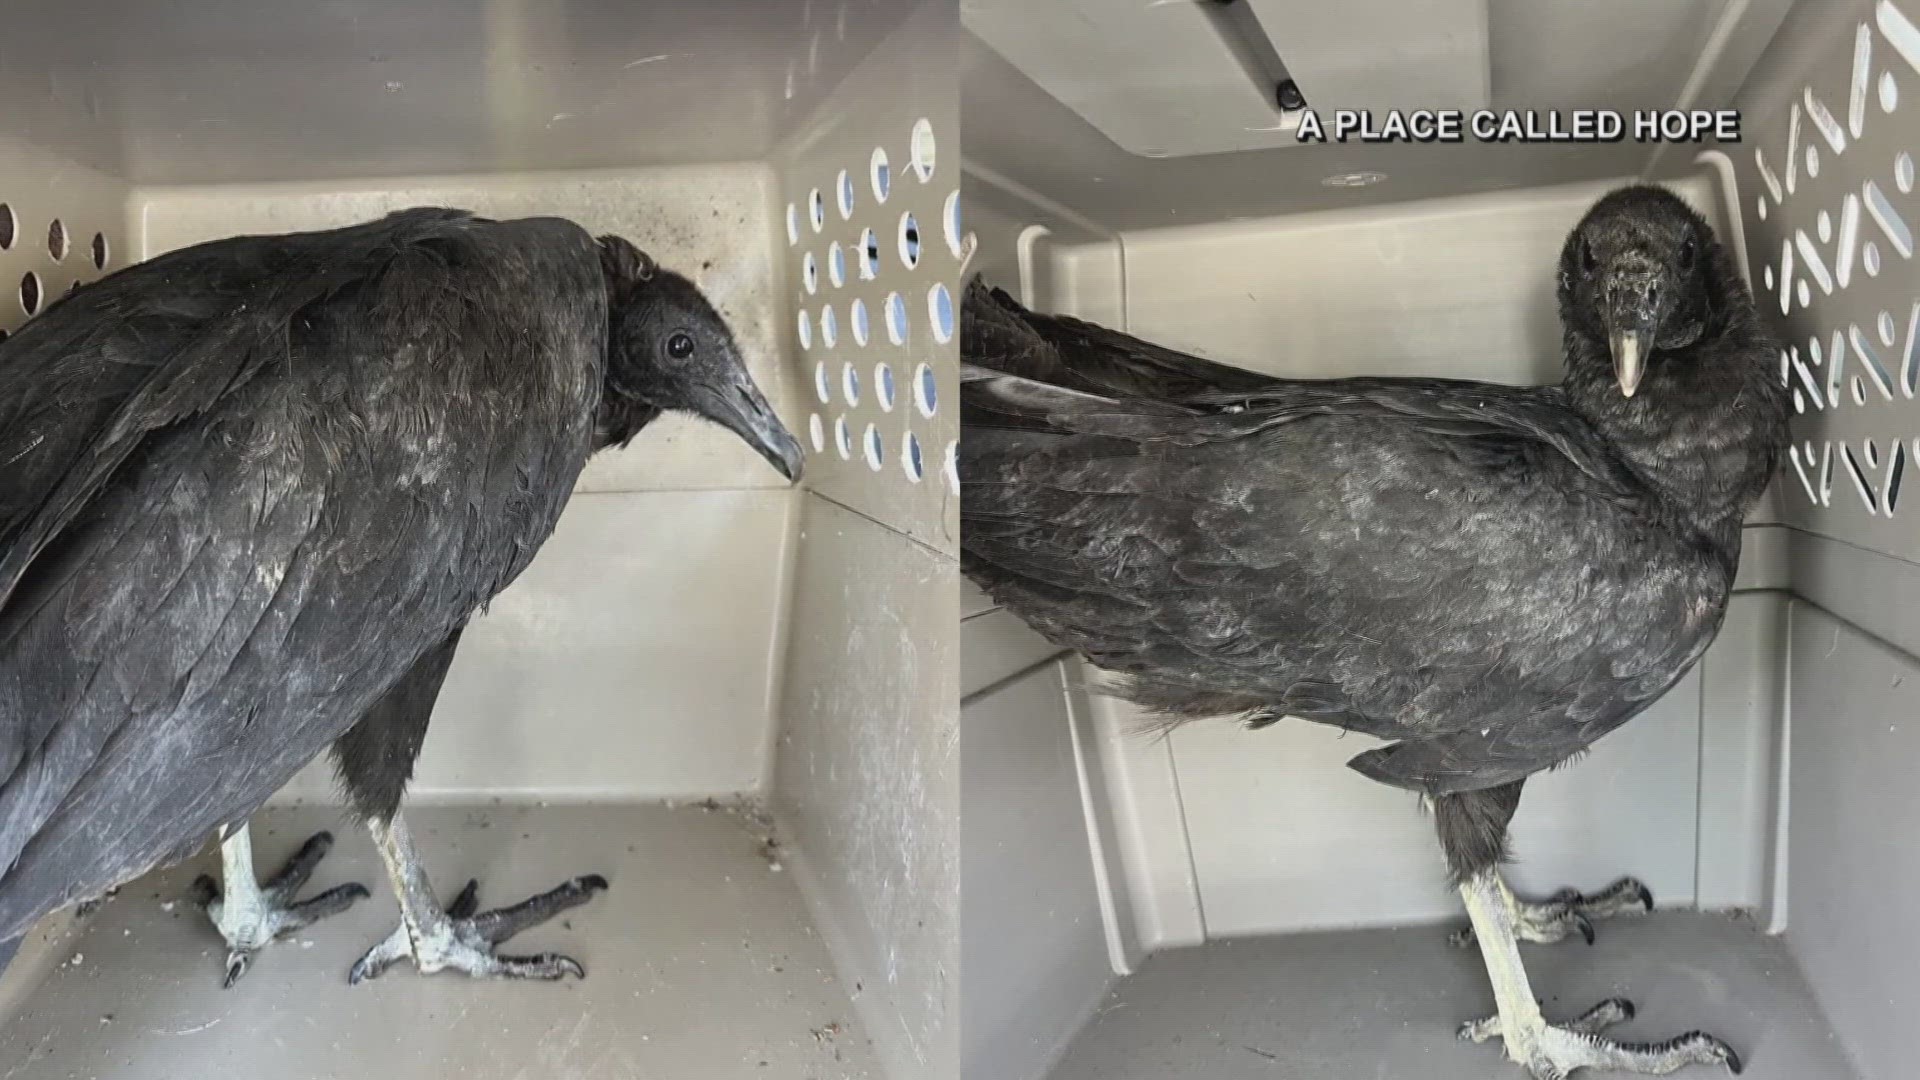 After a slew of tests, staff at an animal rehab center determined the vultures weren't sick. They were just drunk. They were given fluids and a good night of rest.